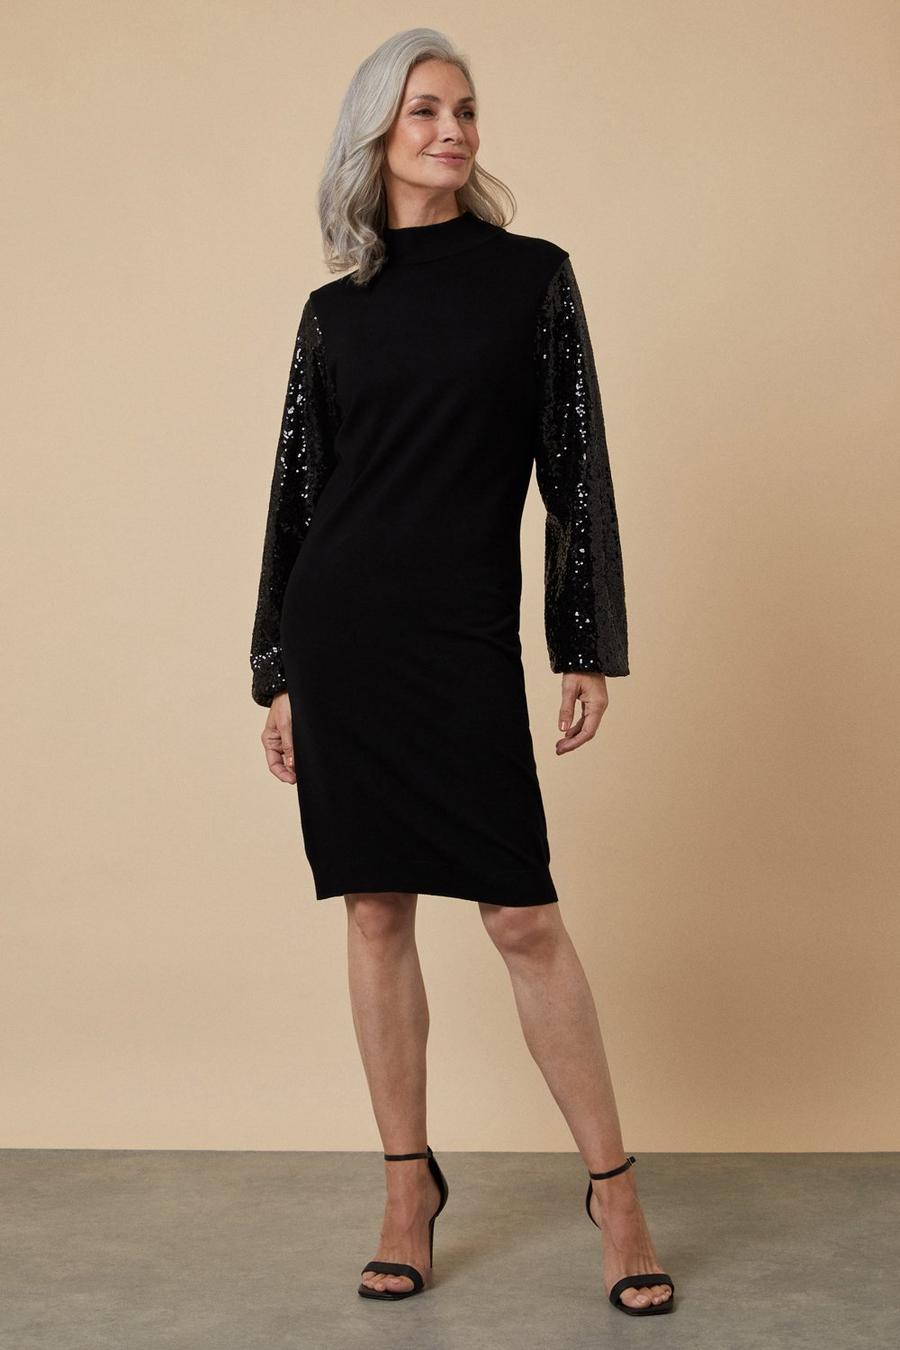 Sequin Sleeve Black High Neck Knitted Dress